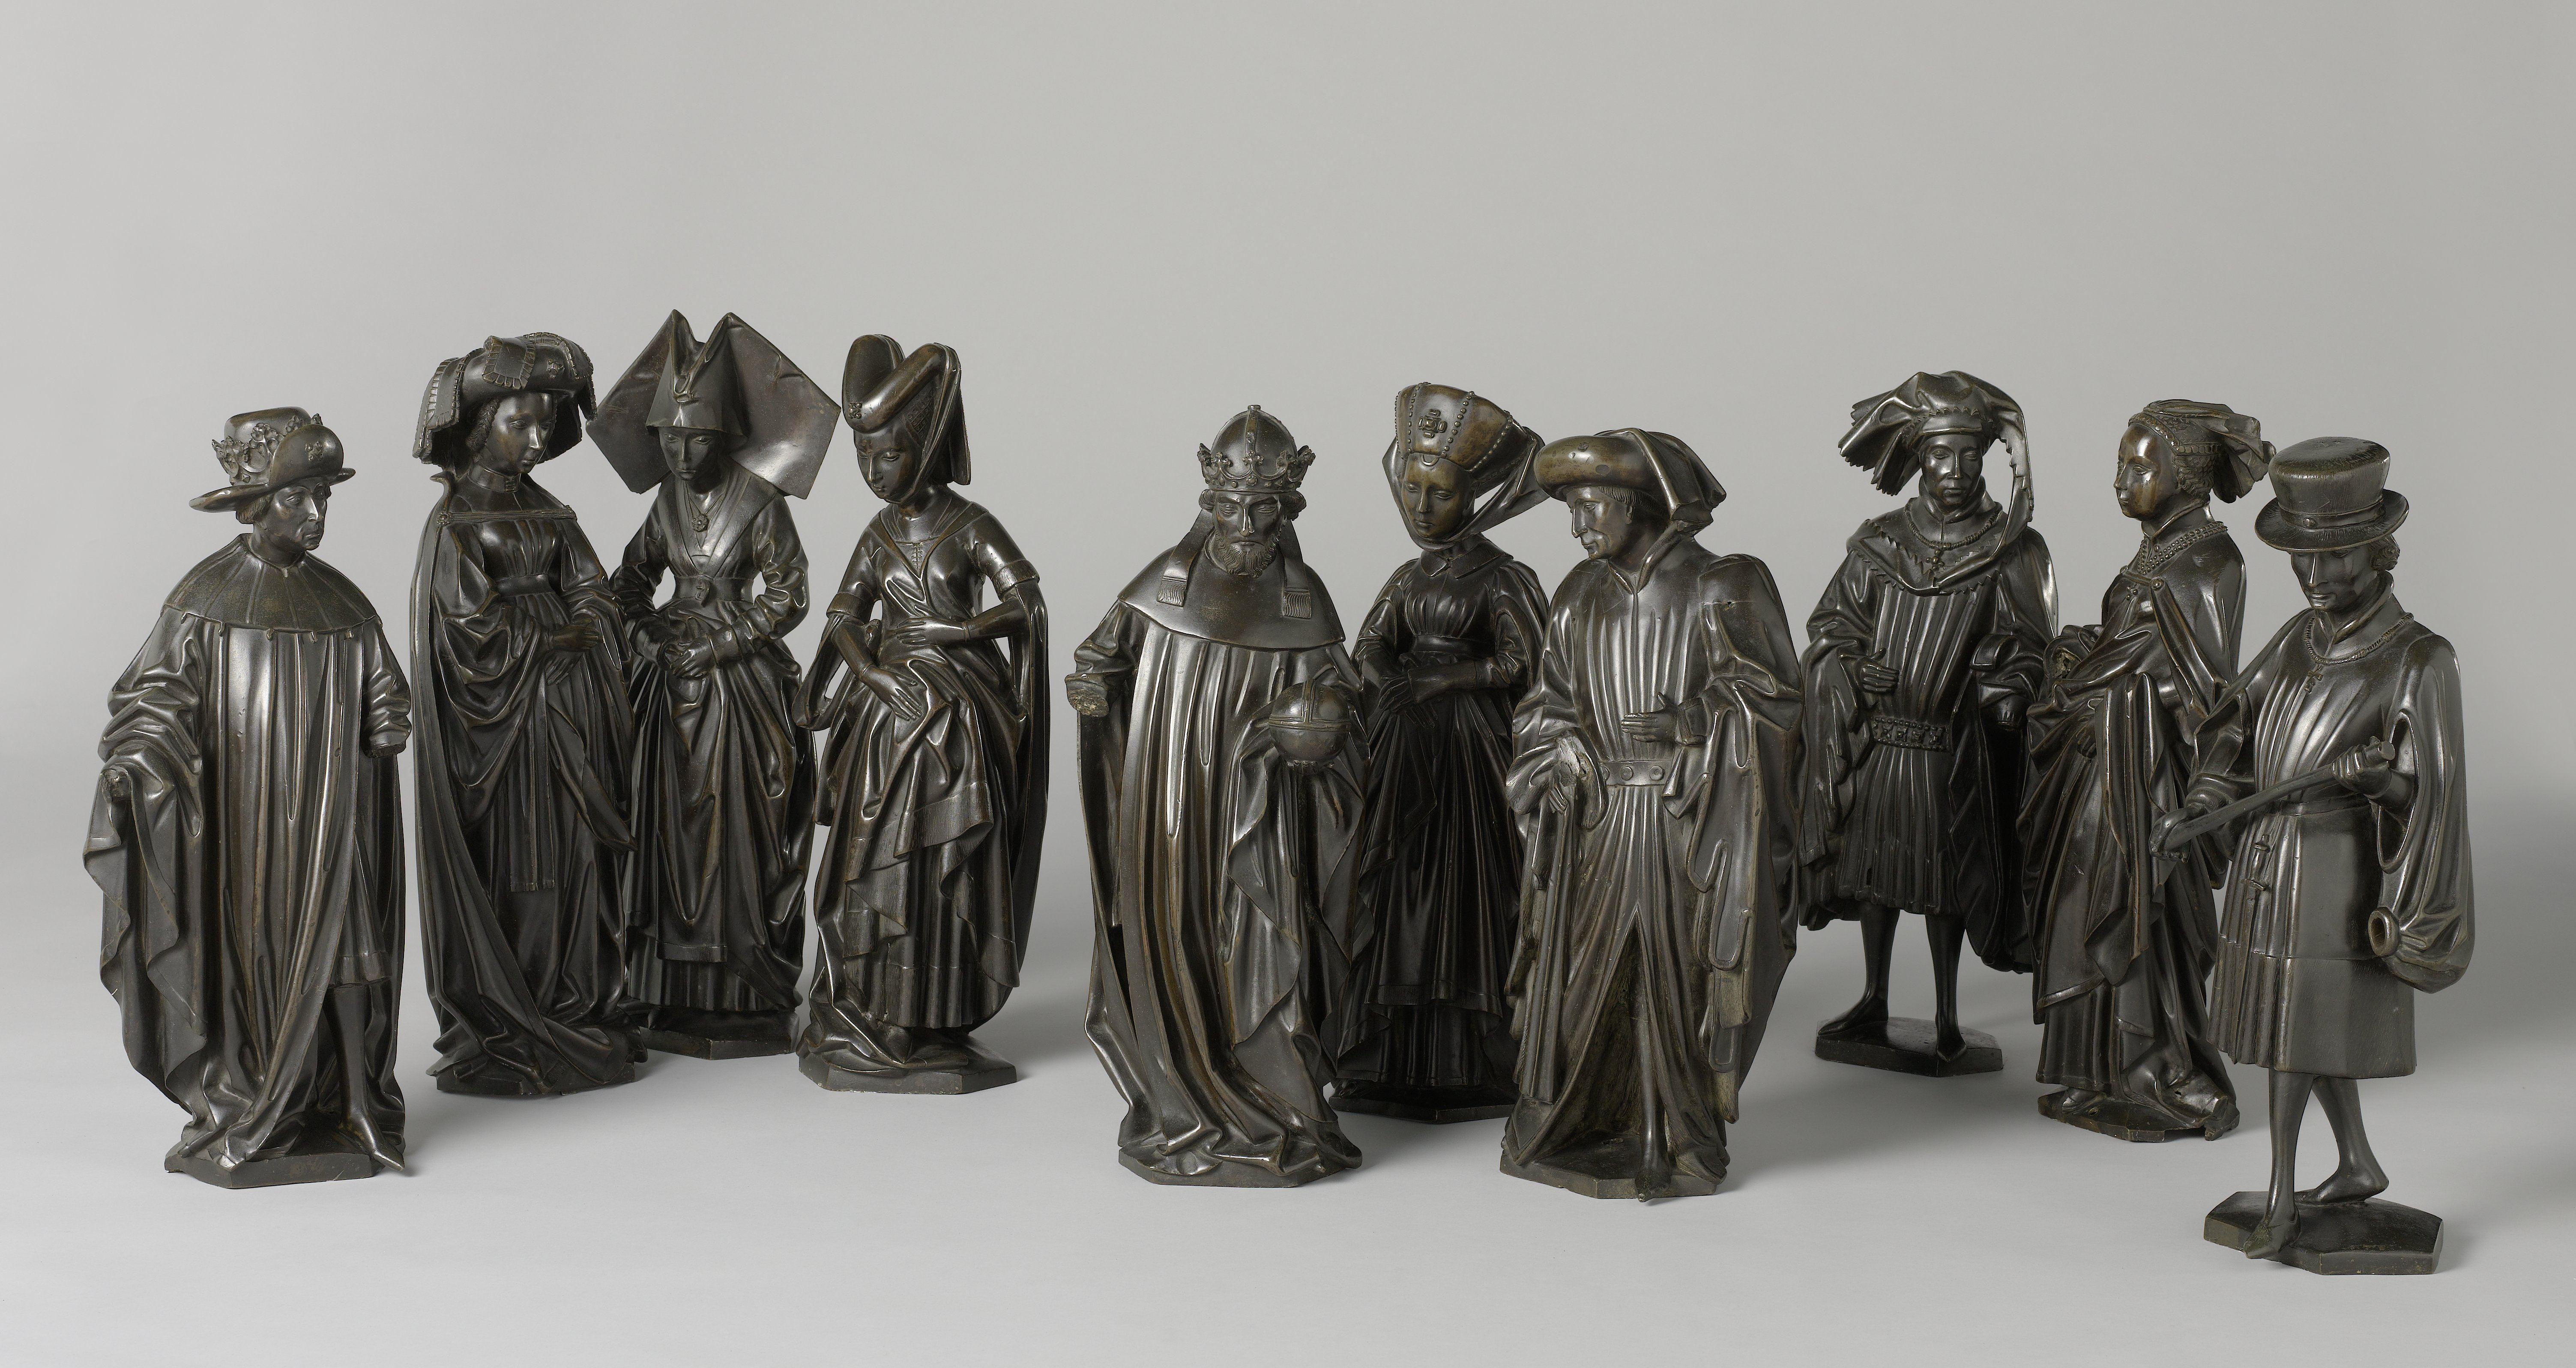 Bronze 'Pleurants' from the tomb of Isabella of Bourbon, wife of Charles the Bold, duke of Burgundy. 10 figures left from the original 24 (family members of the Burgundian dynasty). Ca. 1475-1476.jpeg